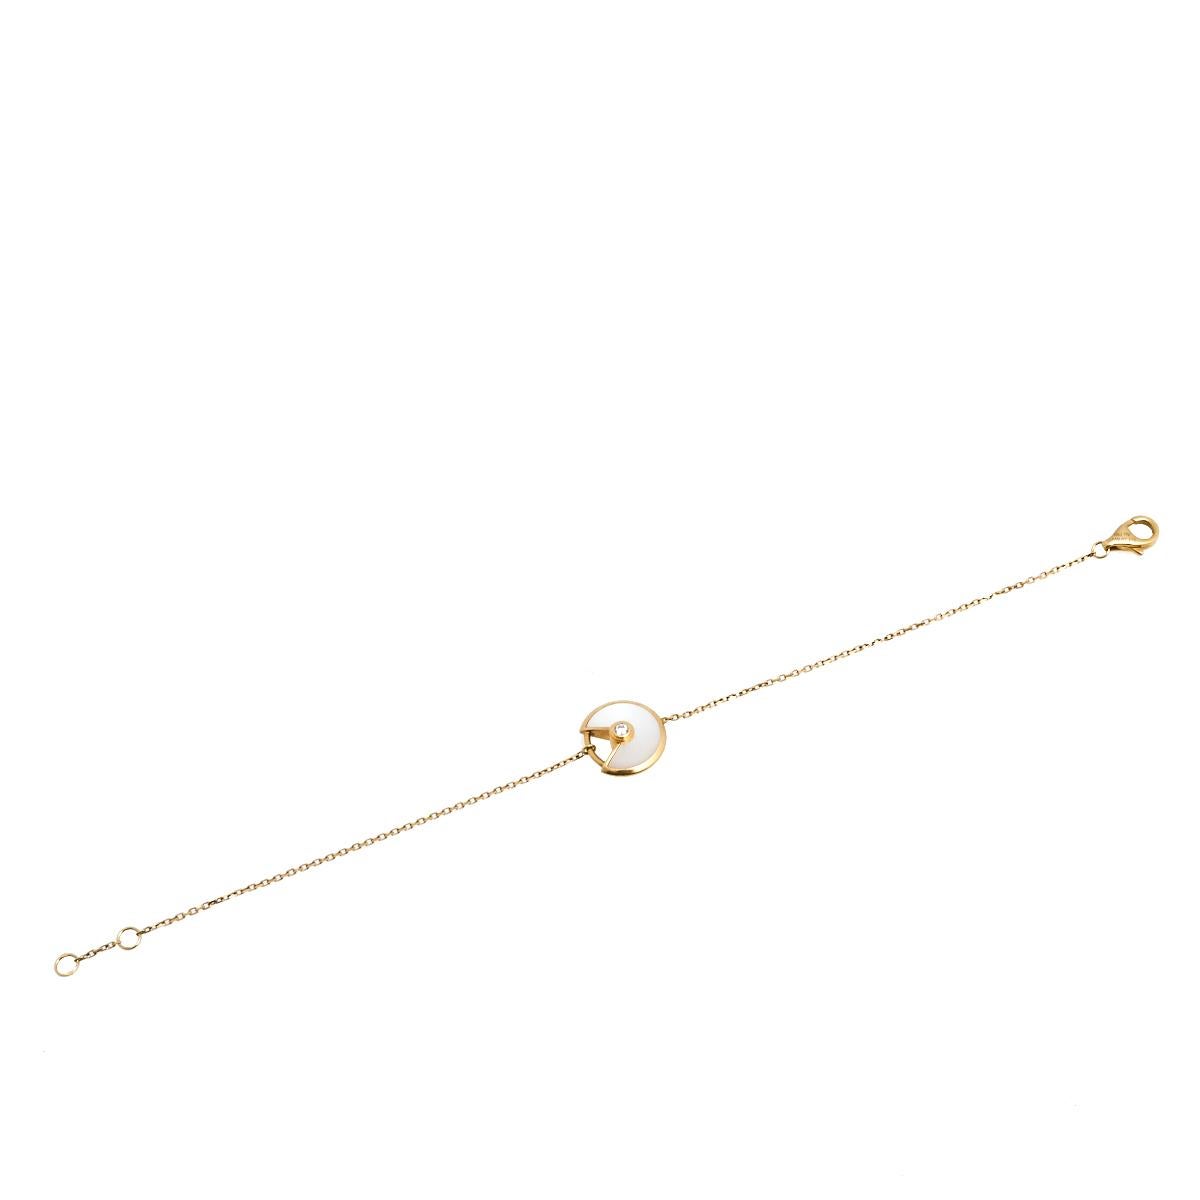 A minimal yet magnificent offering from Cartier's Amulette de Cartier line. The bracelet comes sculpted in 18k yellow gold and it has the signature motif in mother of pearl highlighted by a shimmering diamond. Smoothly finished, the desirable